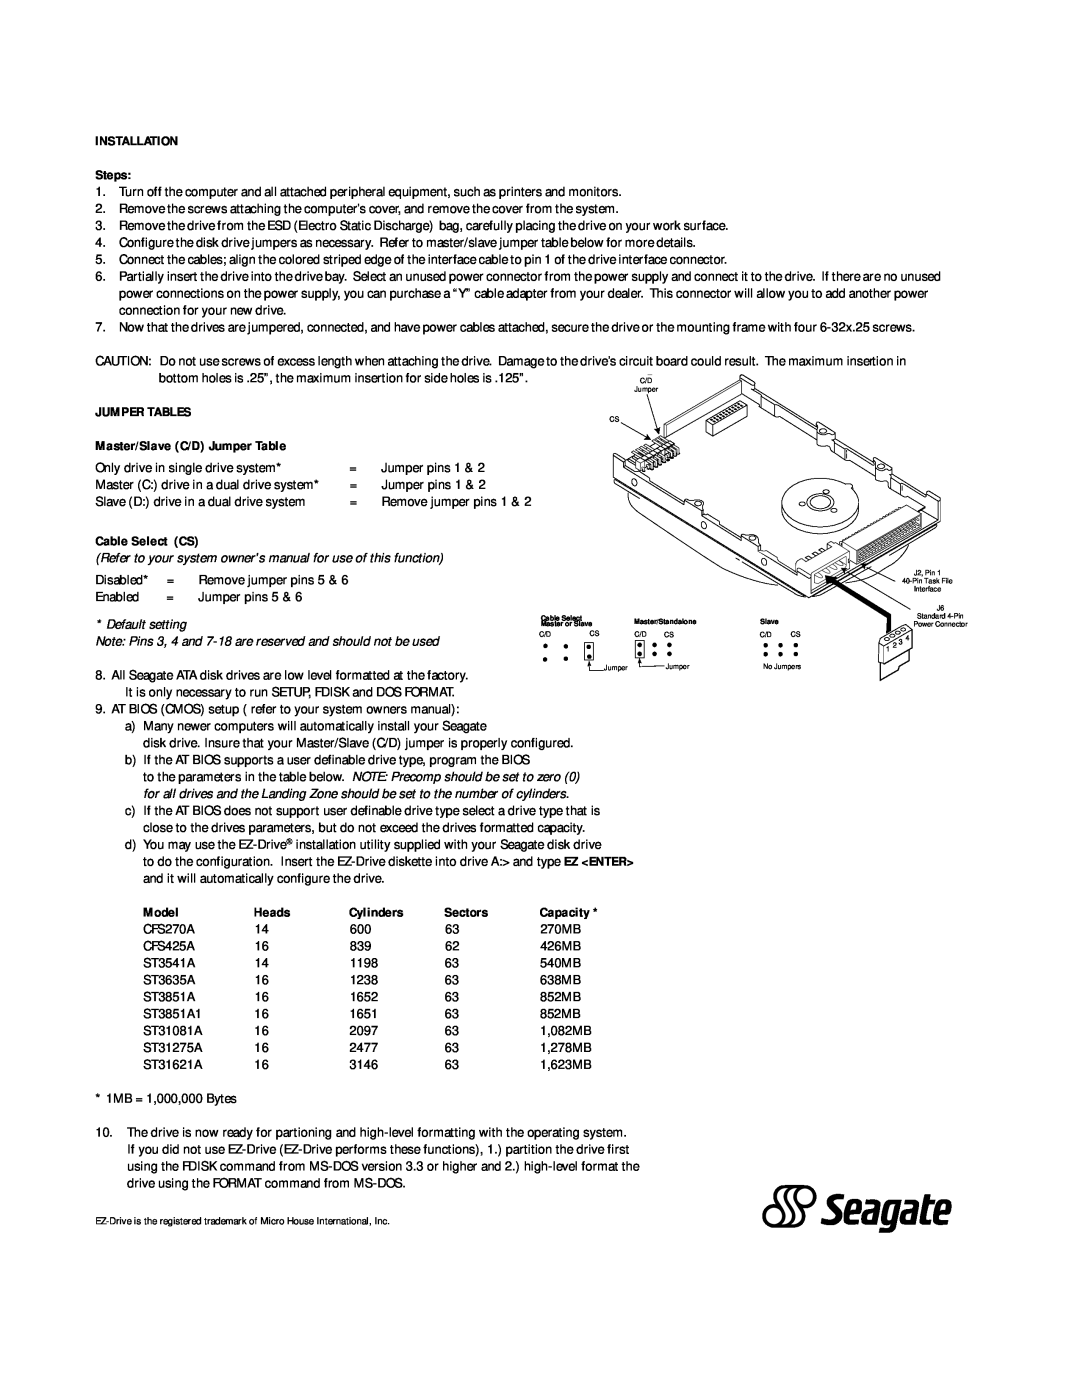 Seagate CFS270A INSTALLATION Steps, Jumper Tables, Master/Slave C/D Jumper Table, Cable Select CS, Model, Heads, Cylinders 